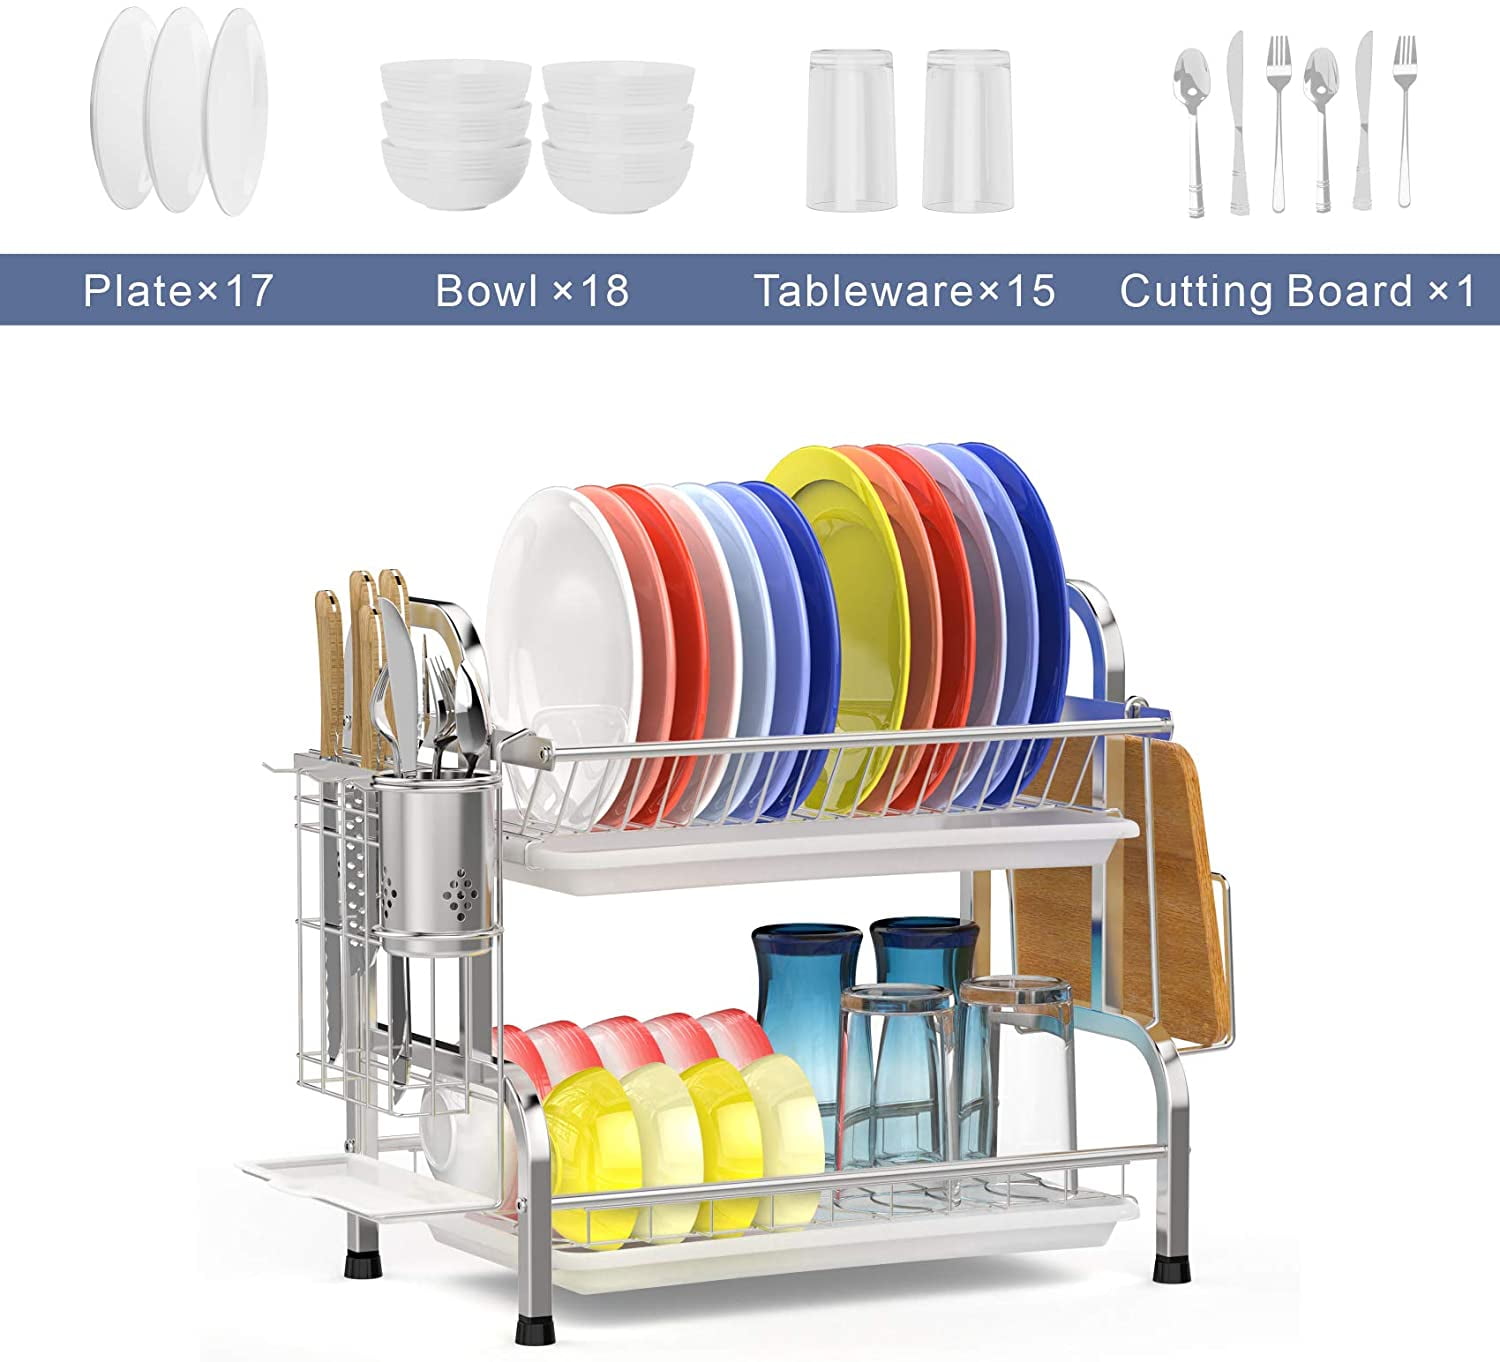 GSlife Large Stainless Steel 2 Tier Dish Rack with Drainboard Details about    Dish Drying Rack 